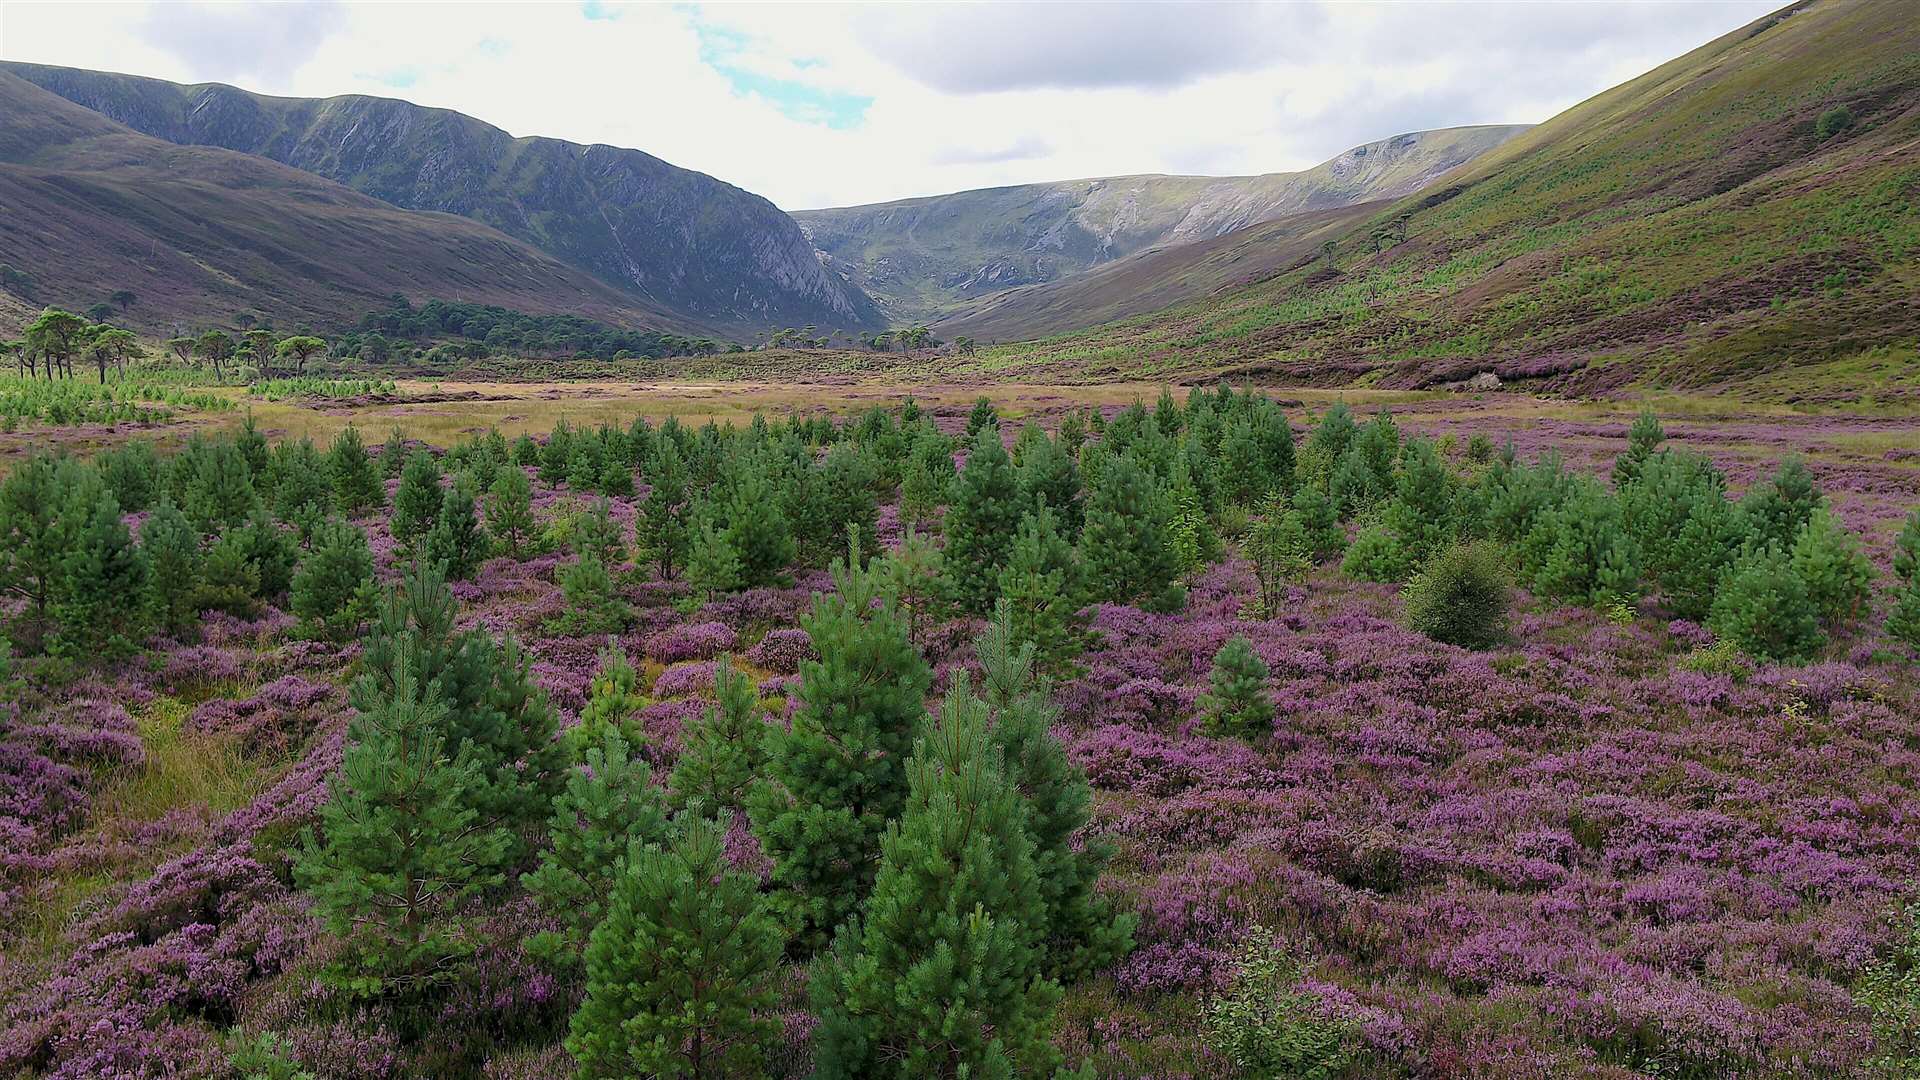 NatureScot say the area is 'thriving' and forest area has expanded 'massively'. Photo: Norman Strachan